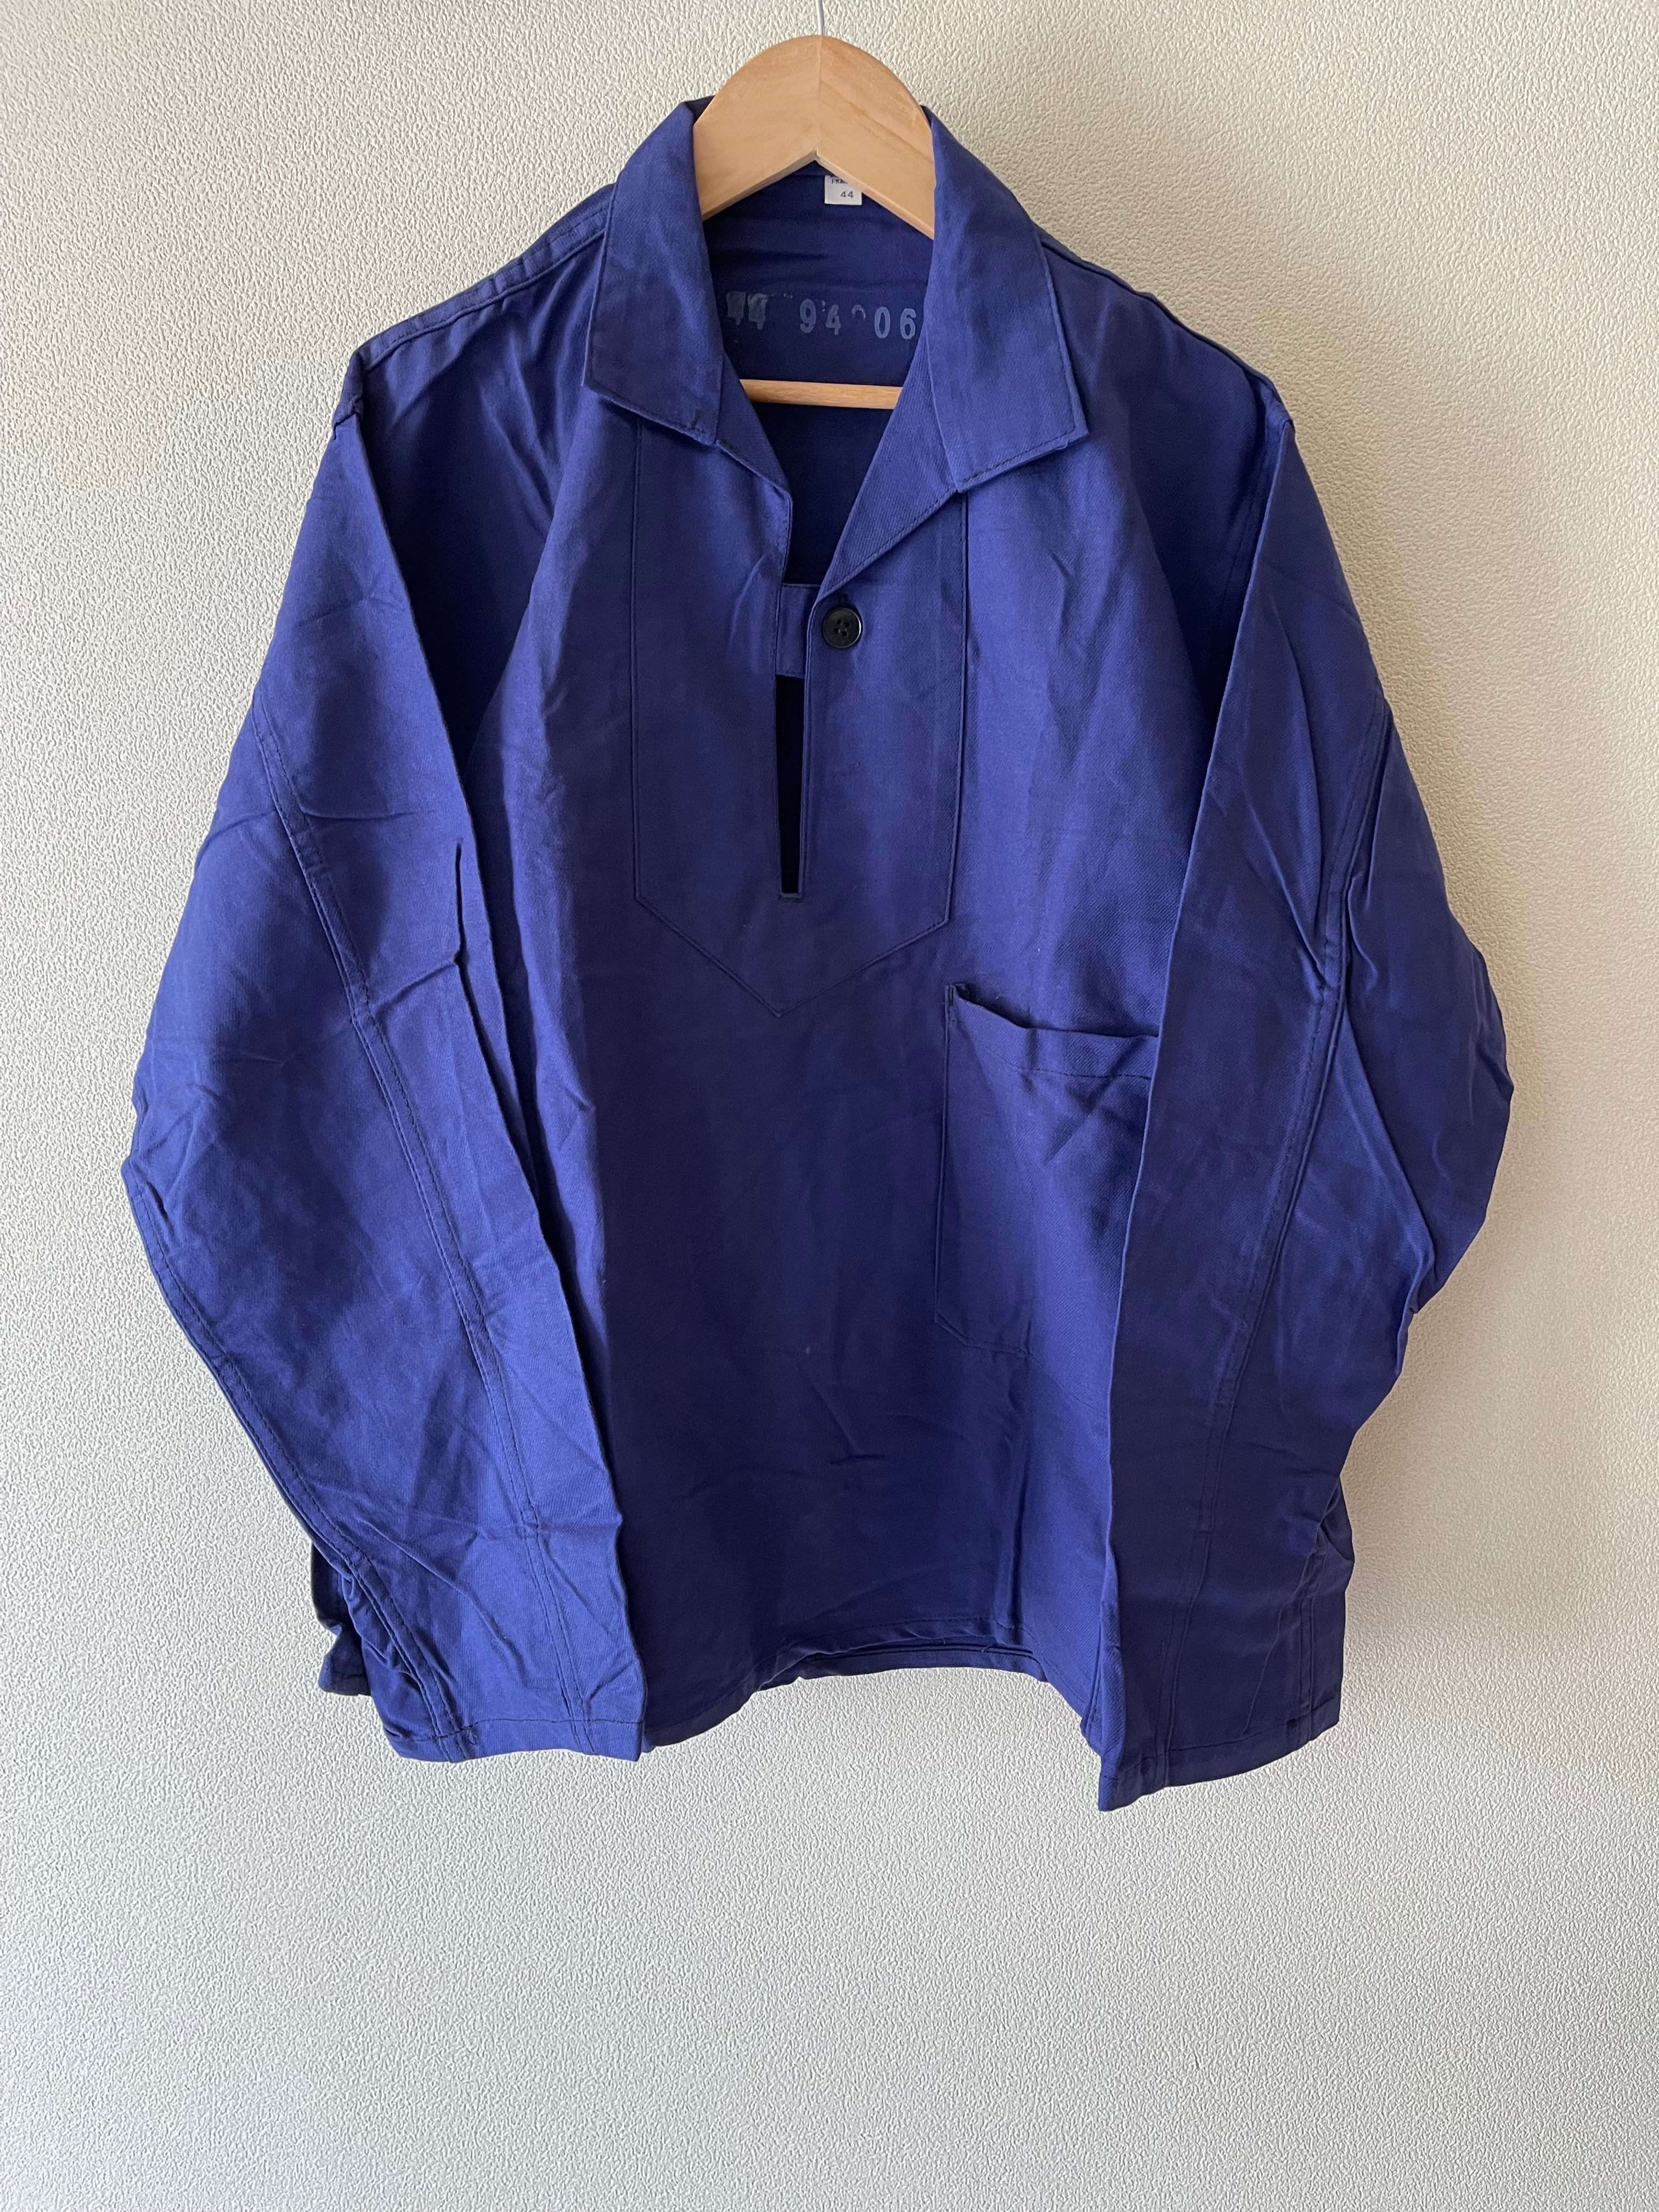 unkhown French Vintage Fisherman Smock | Le Coeur powered by BASE